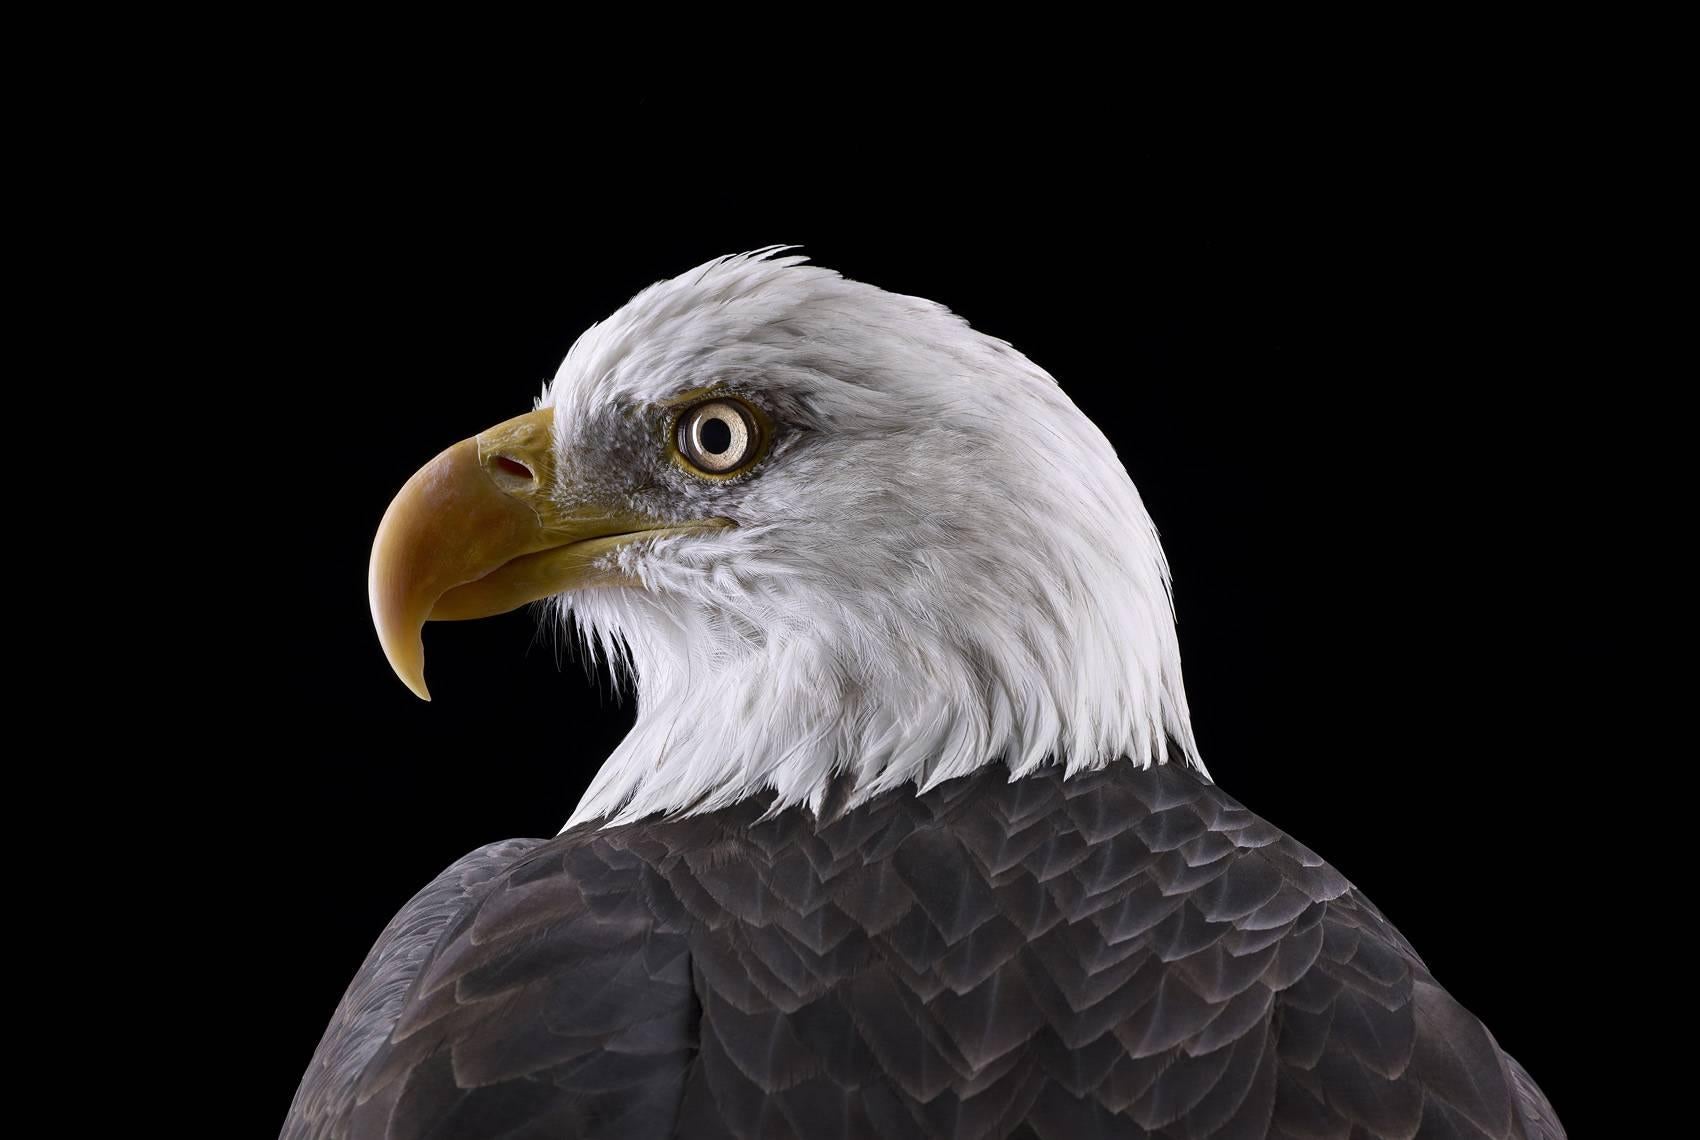 'Bald Eagle #1, St Louis, MO, 2012' is a limited-edition photograph by contemporary artist Brad Wilson from the ‘Affinity’ series which features studio portraits of wild animals. 

This photograph is sold unframed as a print only. It is available in